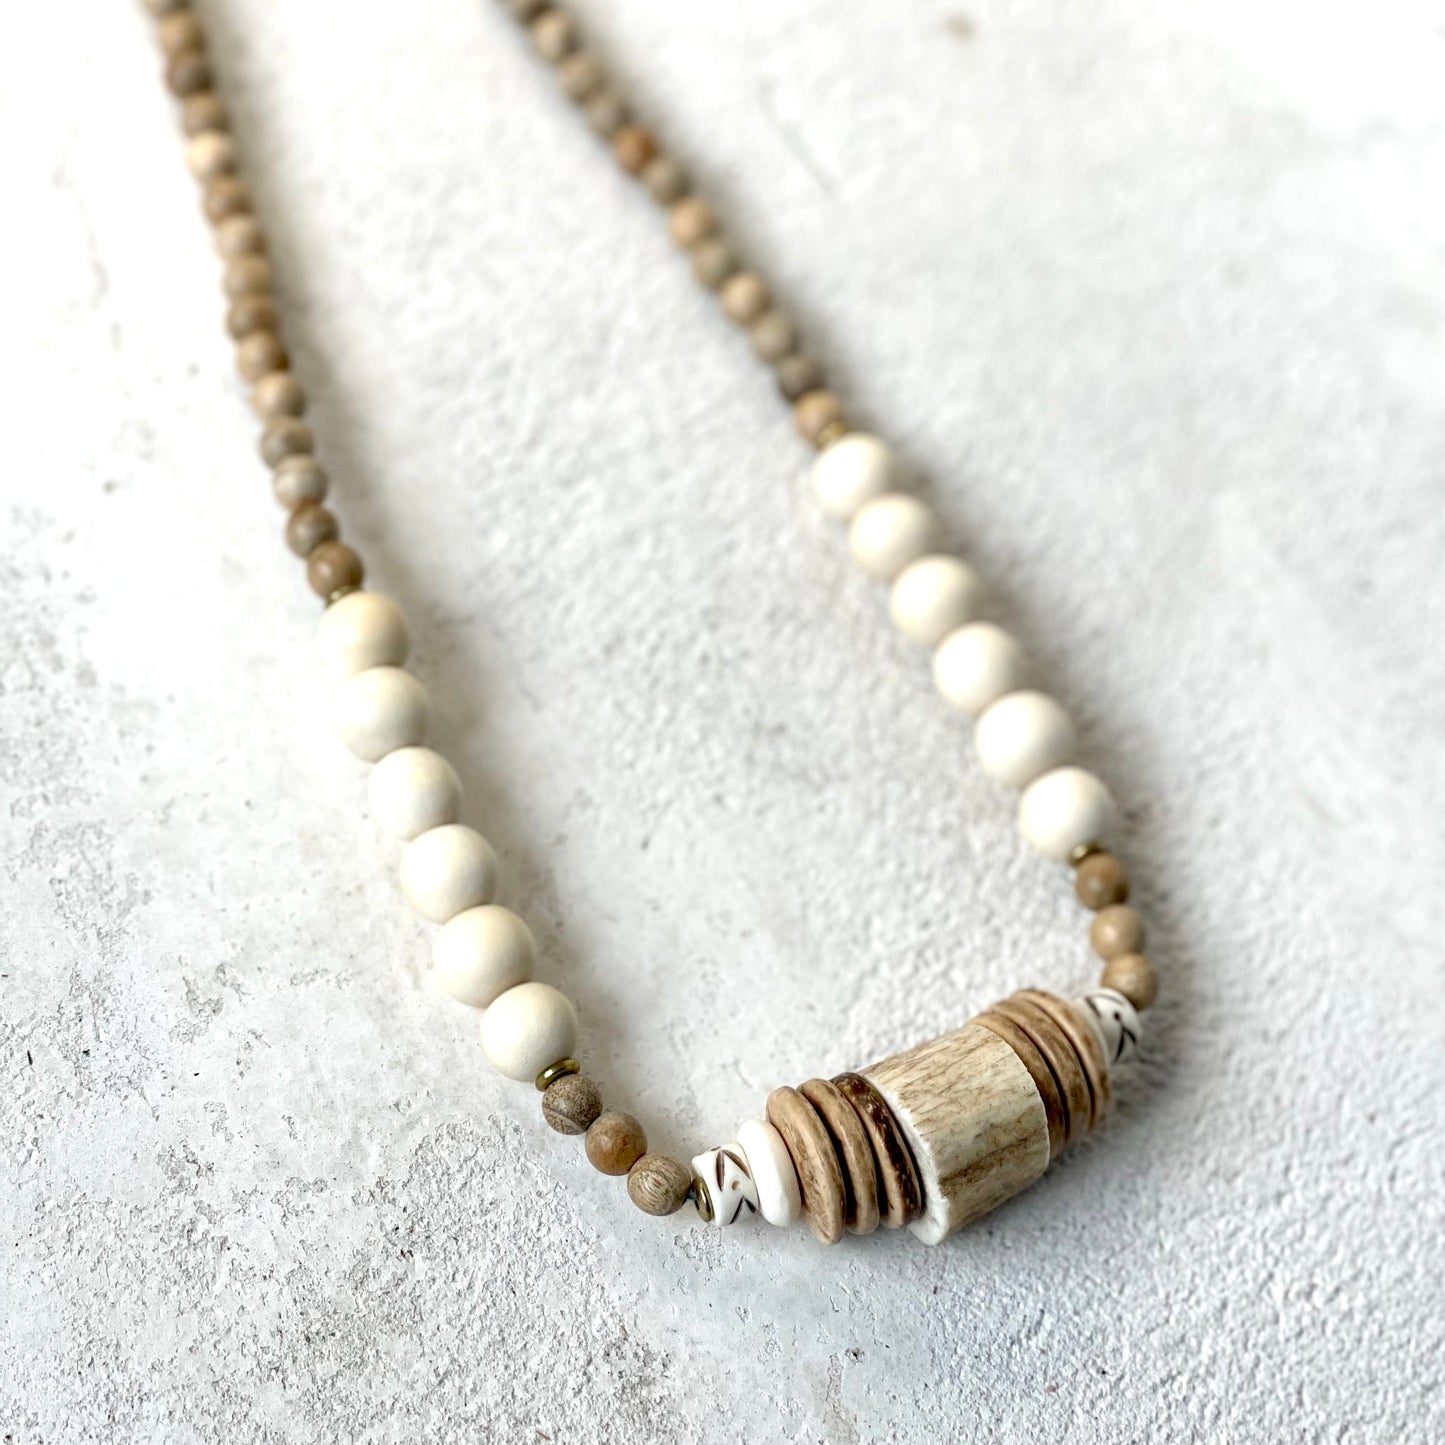 Light  Deer Antler + Wood Bead Necklace by L rae jewelry gift